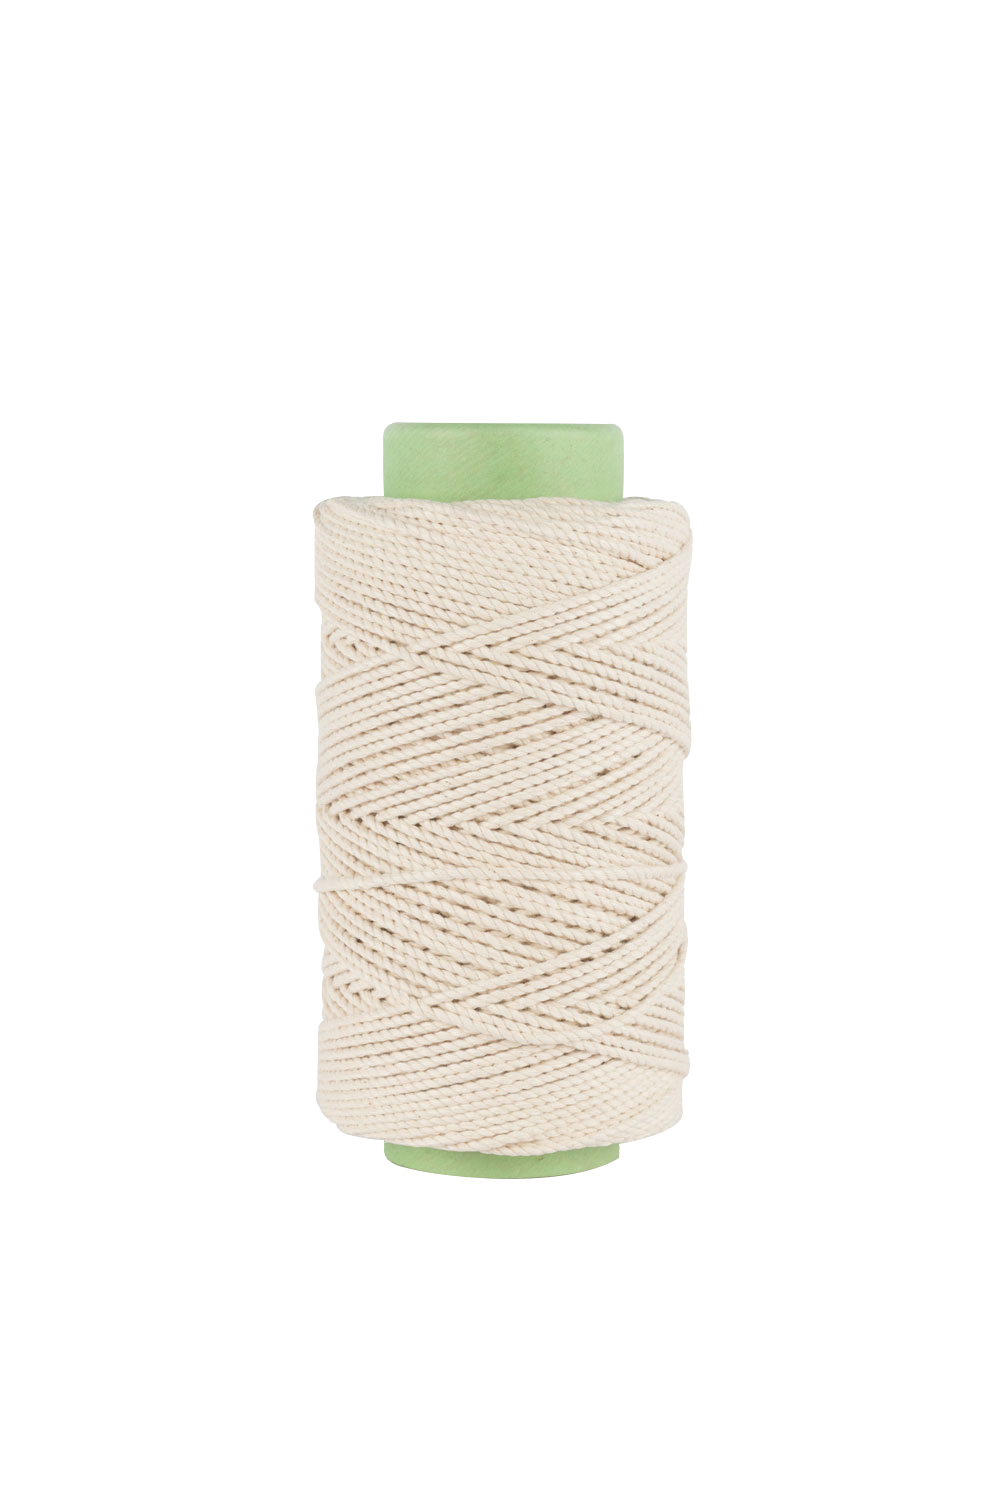 3mm 2 ply 100% cotton rope in natural